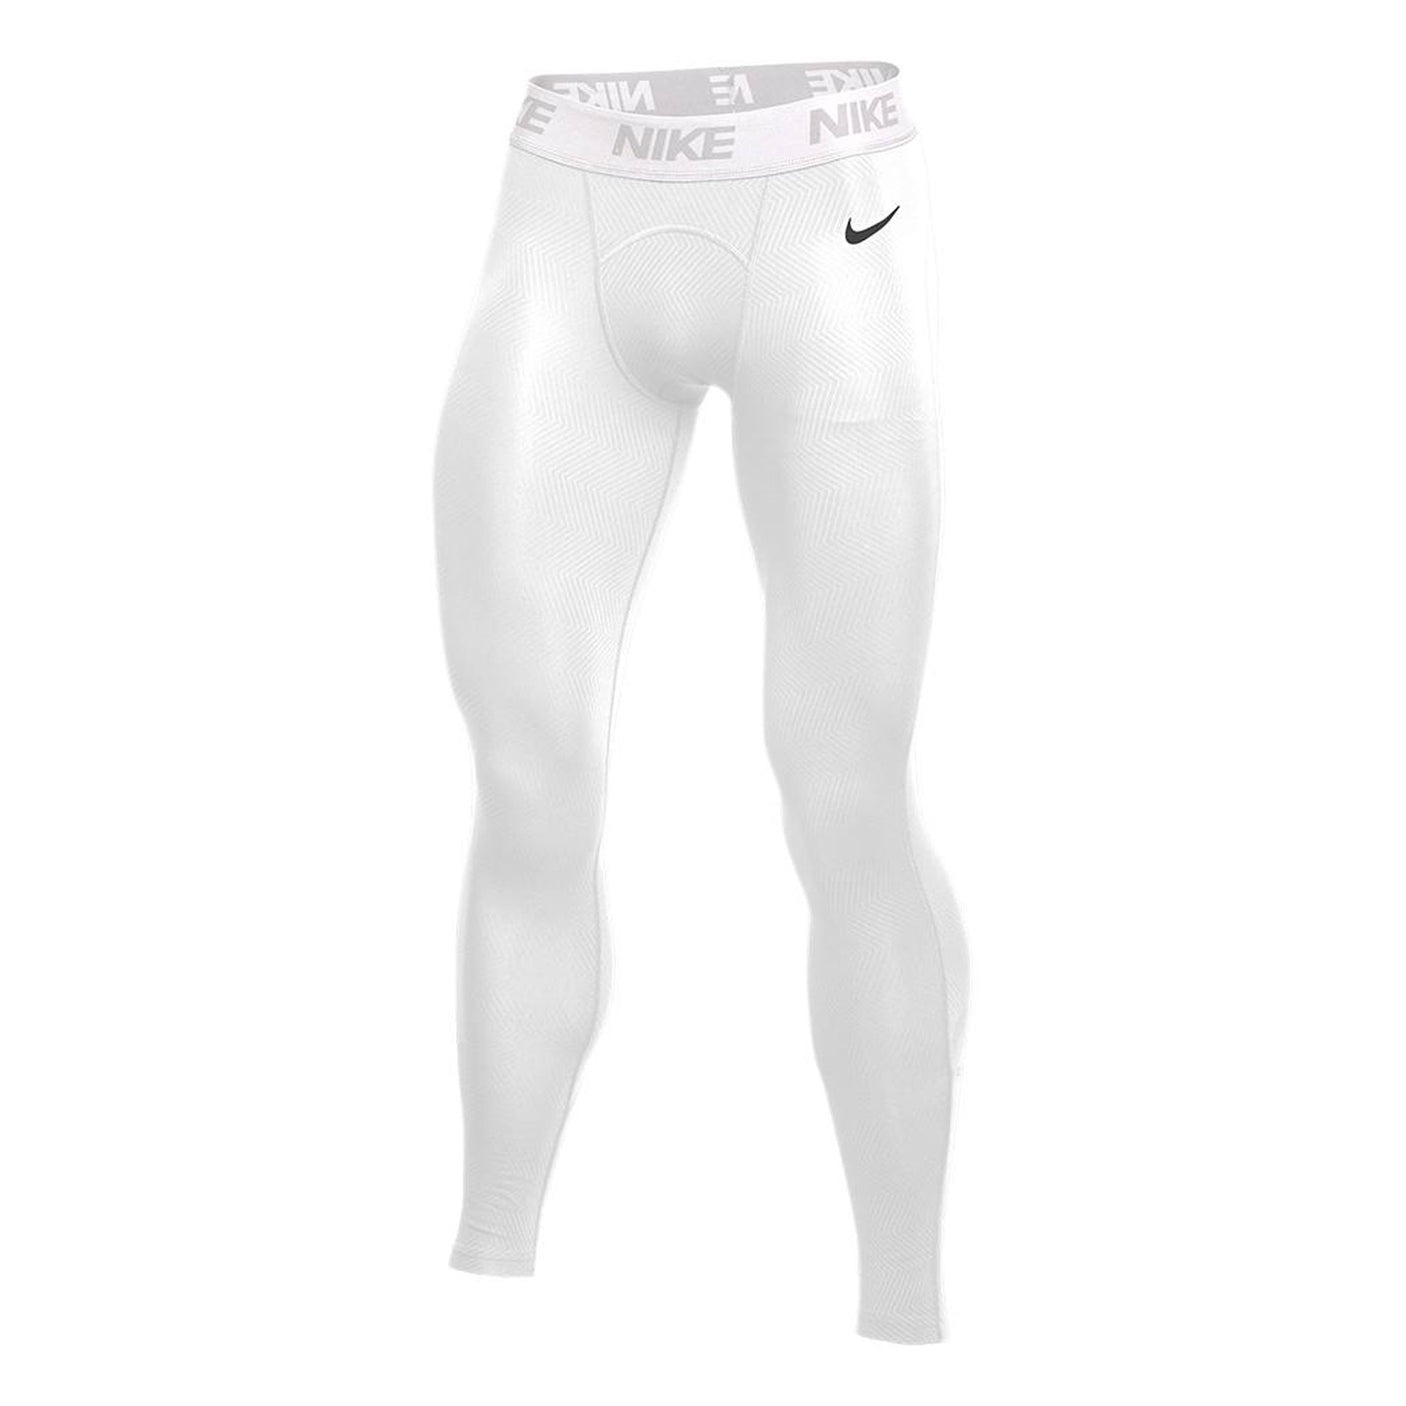 https://aztecasoccer.com/cdn/shop/products/nike-mens-pro-therma-training-tights-white-black-front.jpg?v=1635374921&width=1406